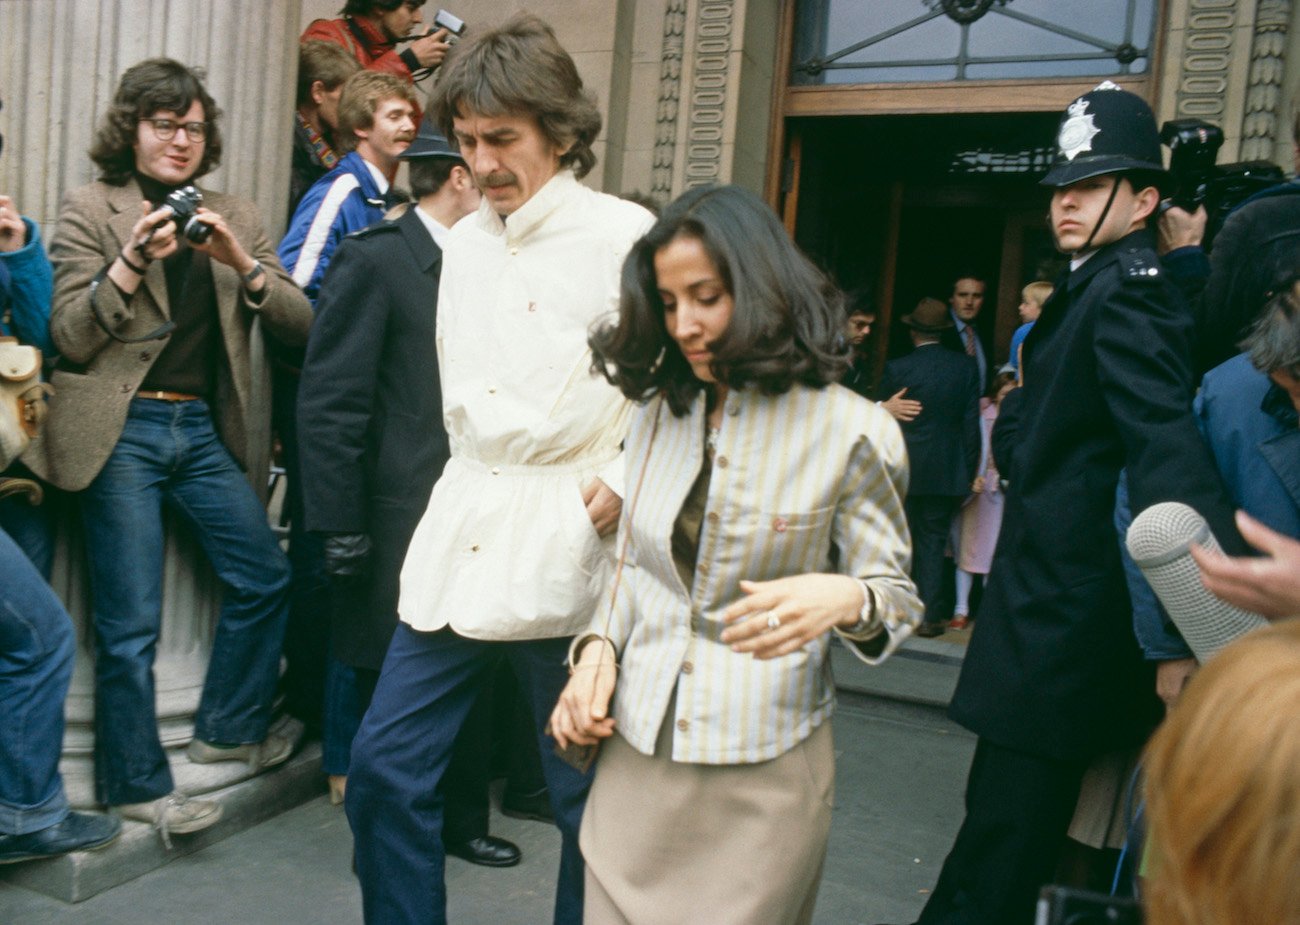 George Harrison and his wife, Olivia, coming out of the Marylebone Register Office after Ringo Starr and Barbara Bach got married in 1981.